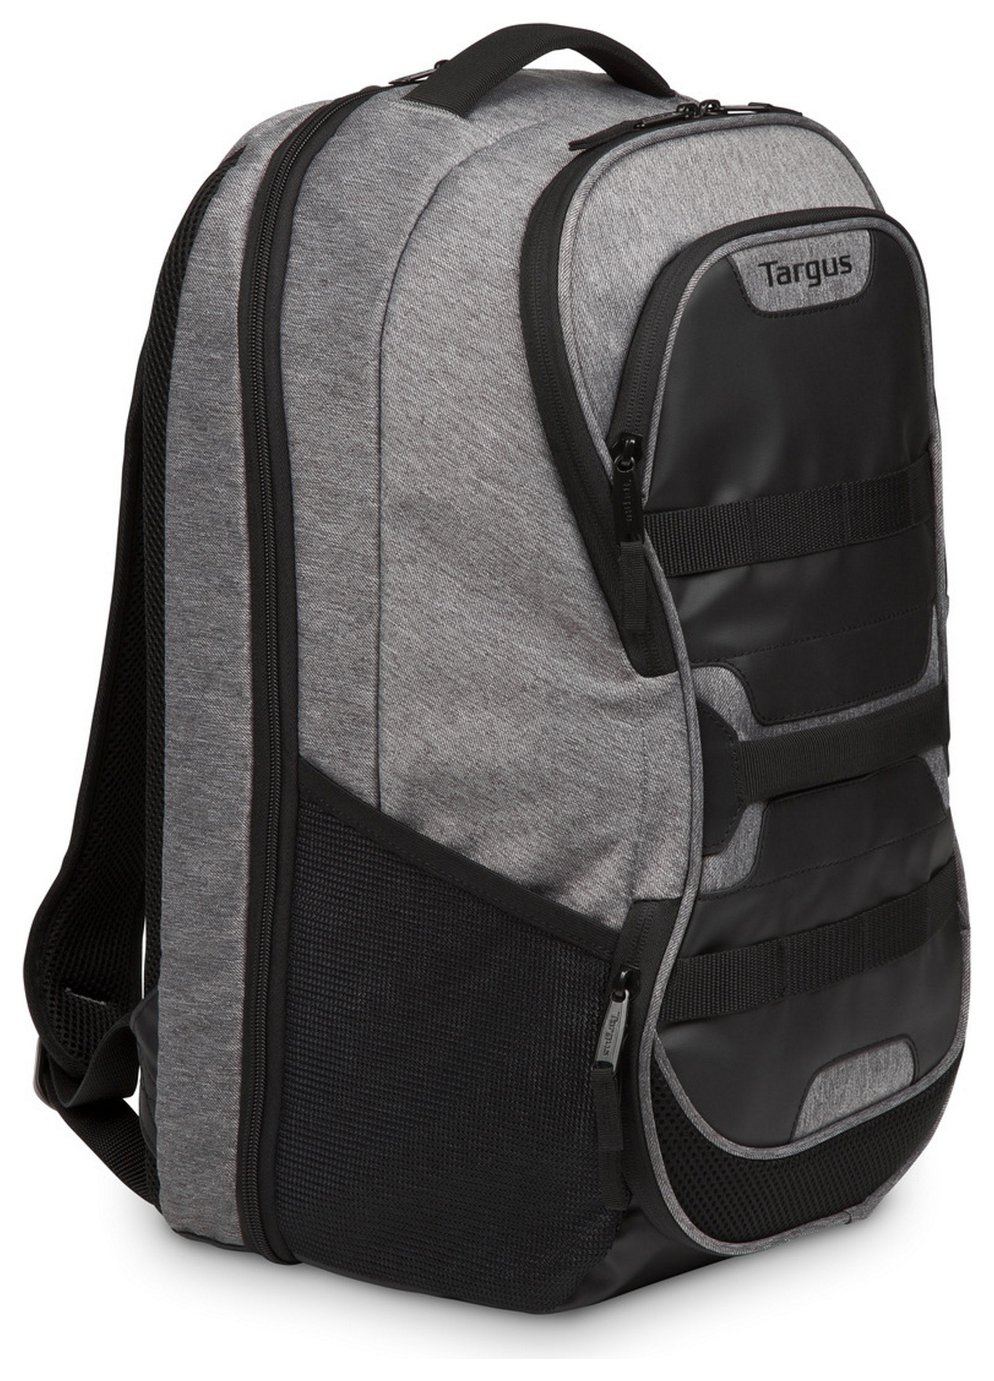 Targus Work&Play 15.6 Inch Laptop Sports Backpack - Grey